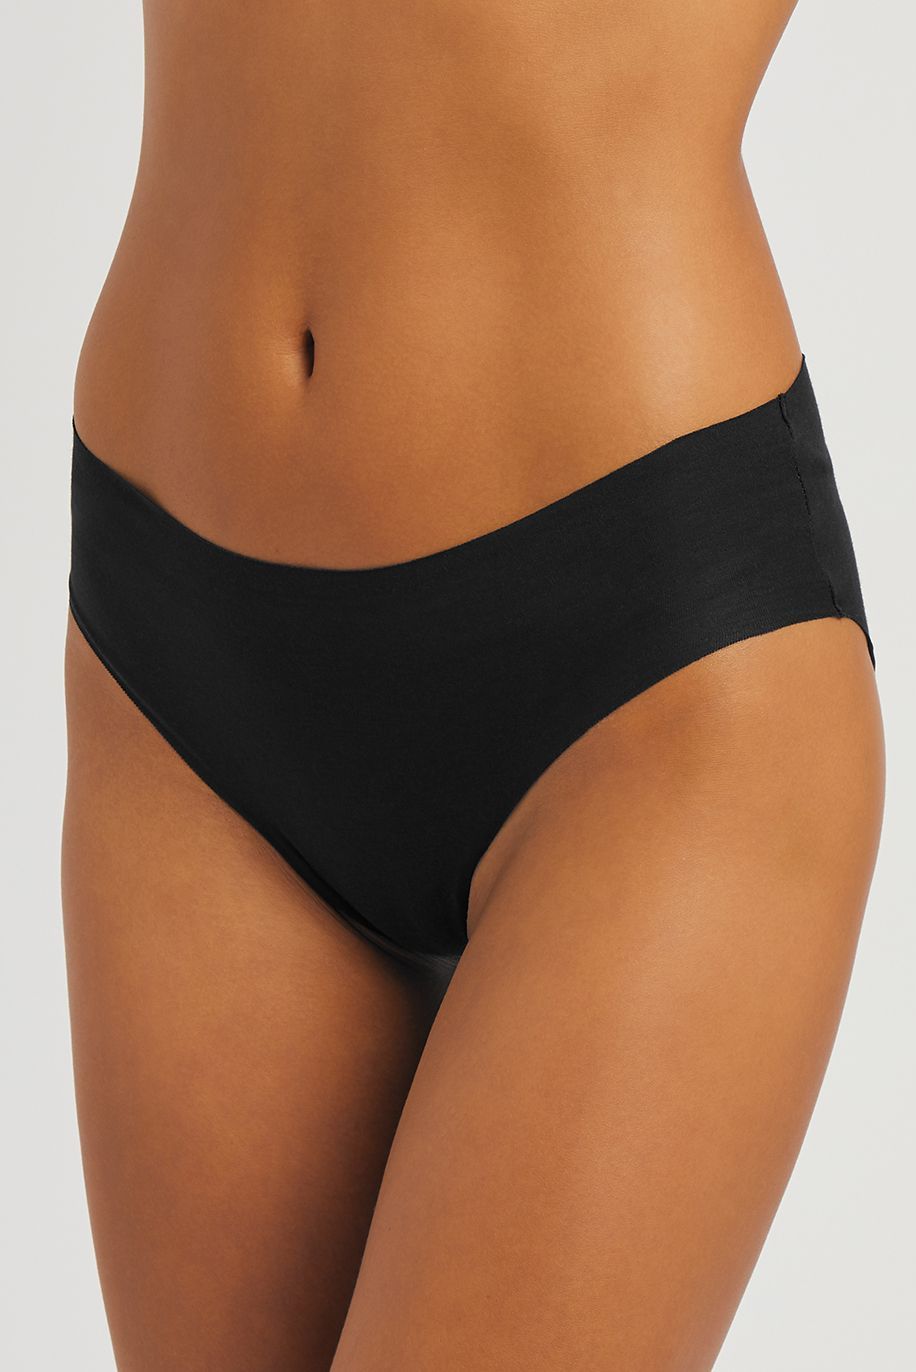 Invisible cotton knickers for £8 - Briefs - Hunkemöller